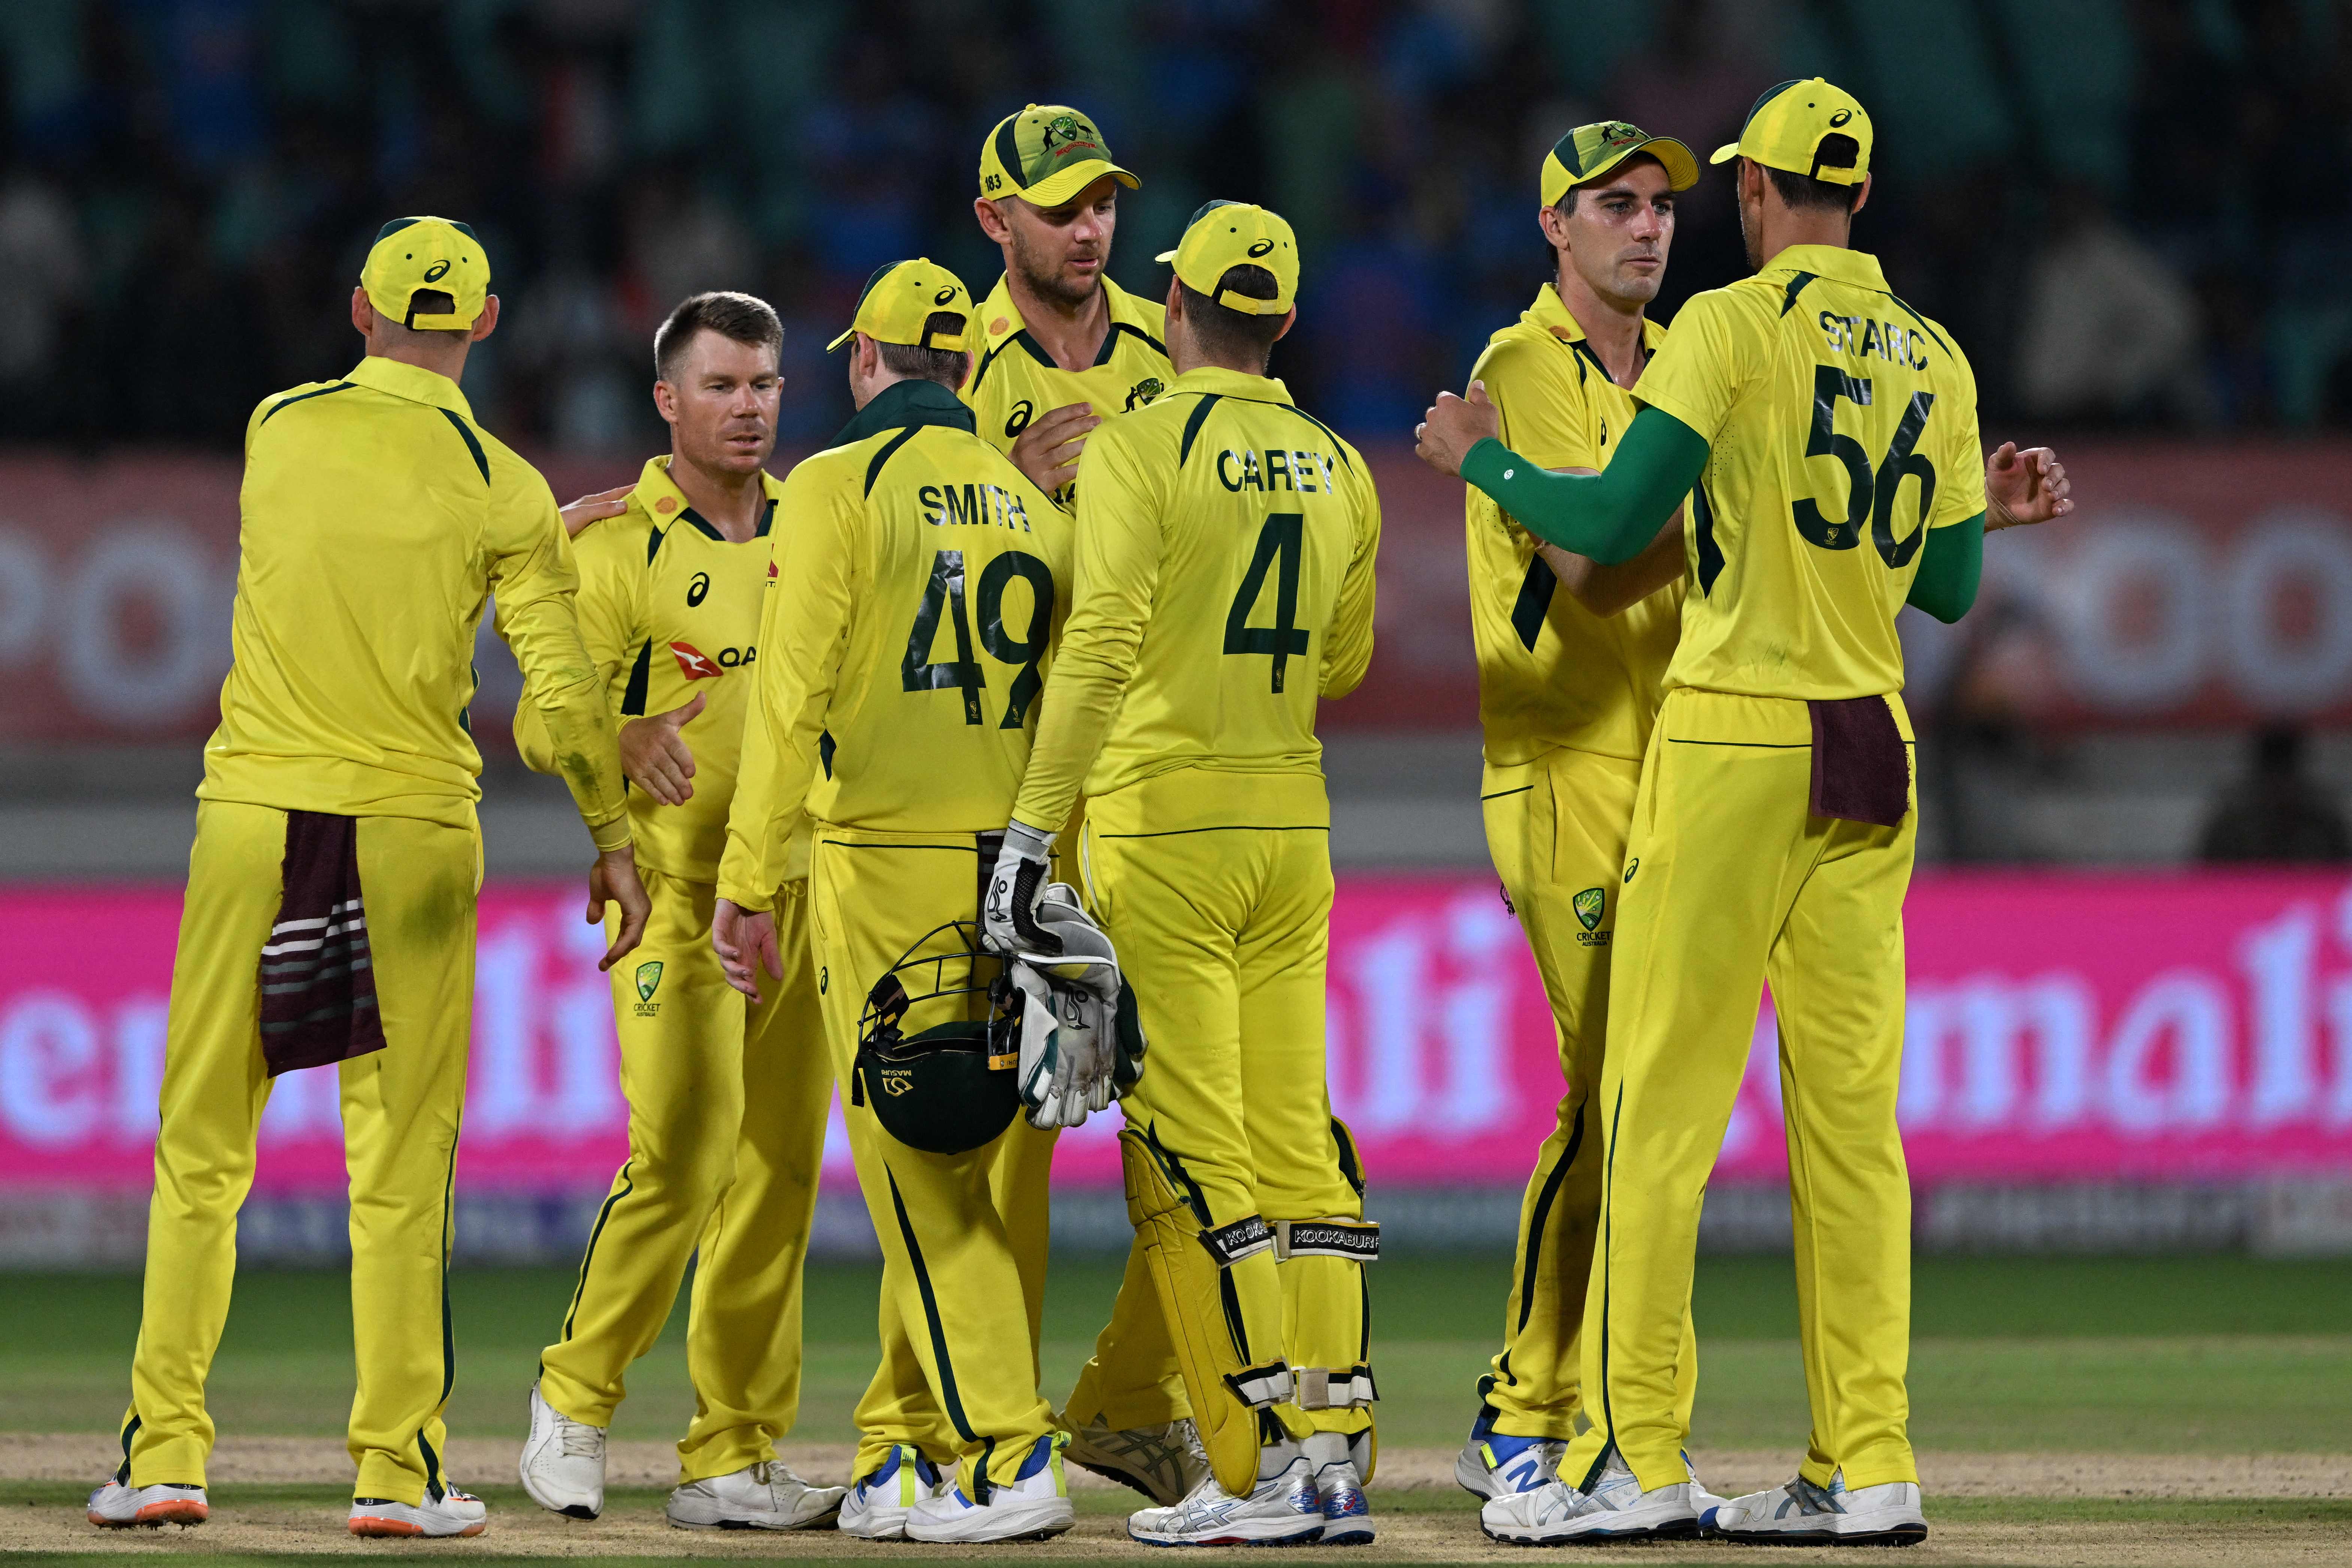 Australia won the third ODI against India after losing the first two